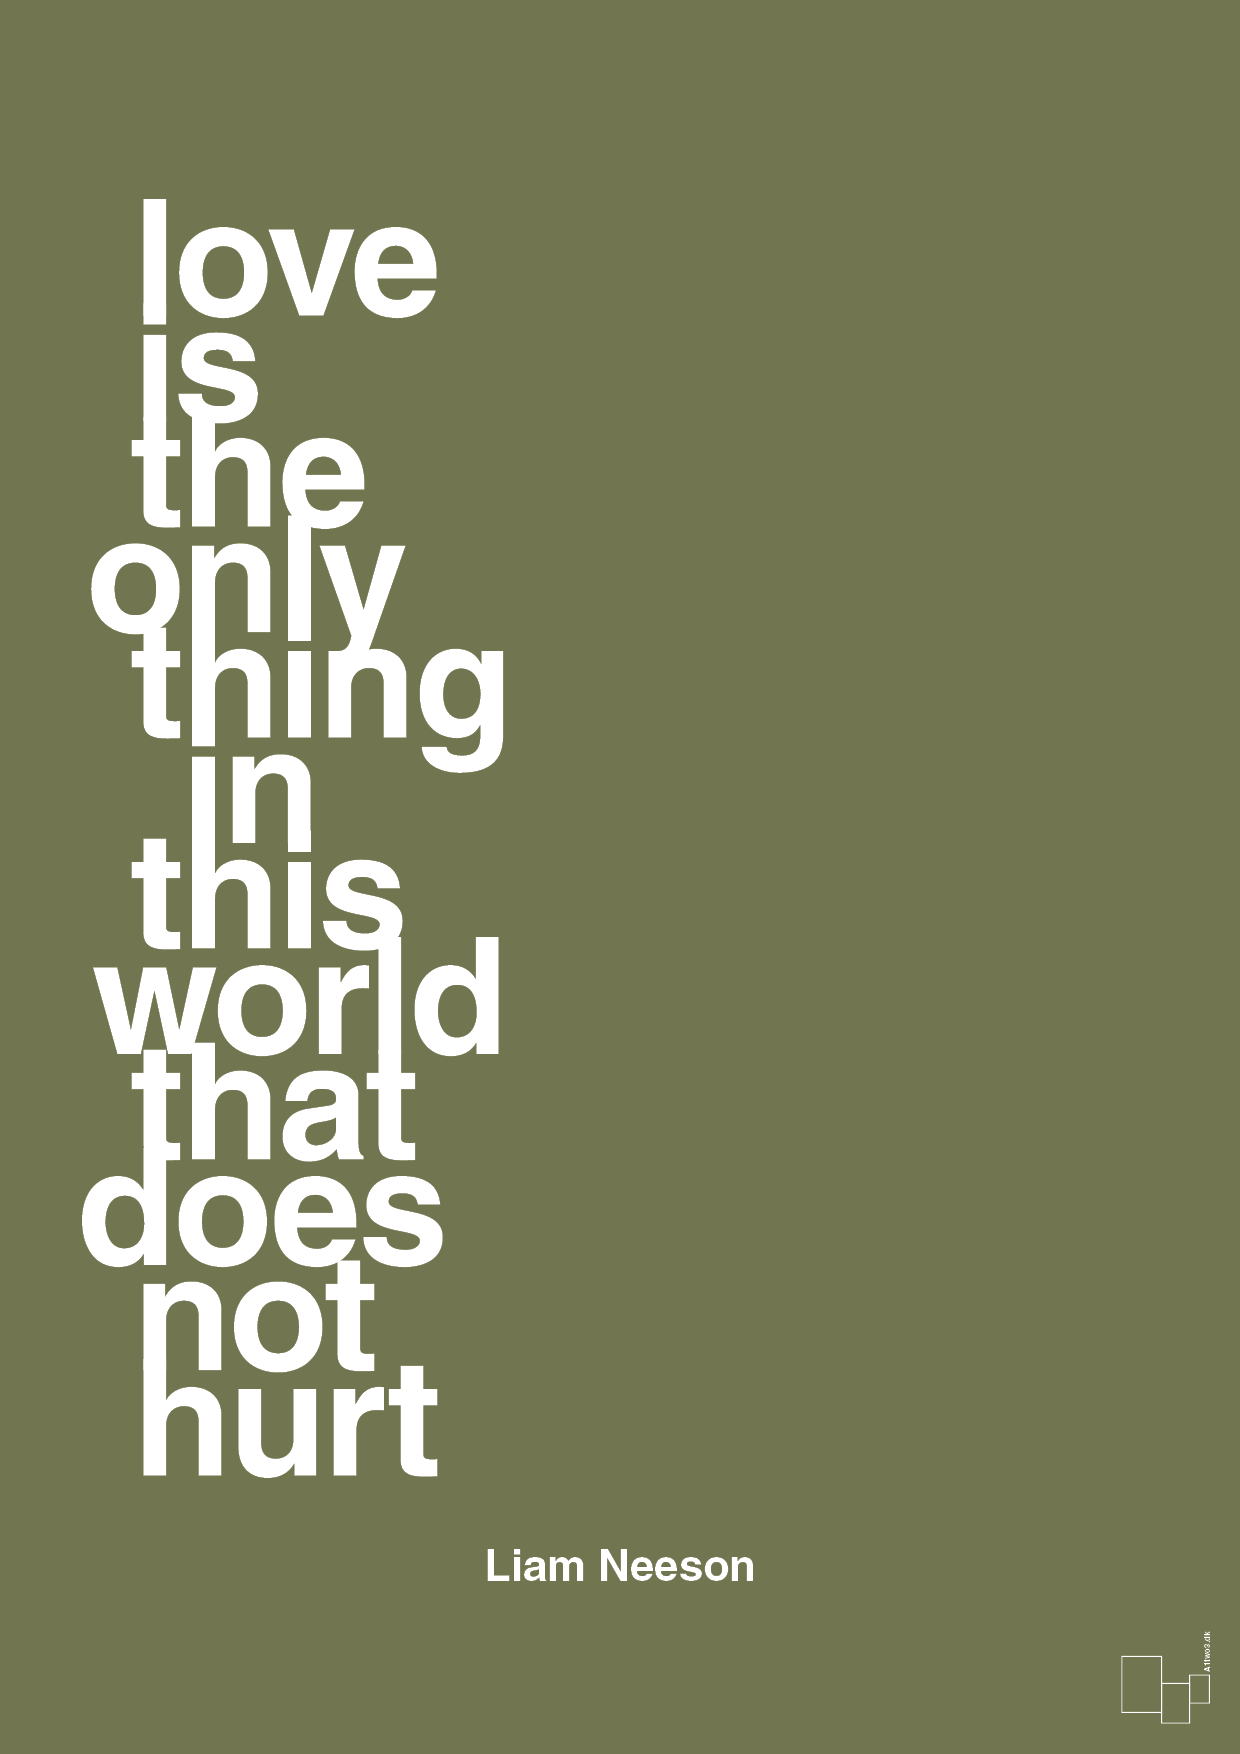 love is the only thing in this world that does not hurt - Plakat med Citater i Secret Meadow